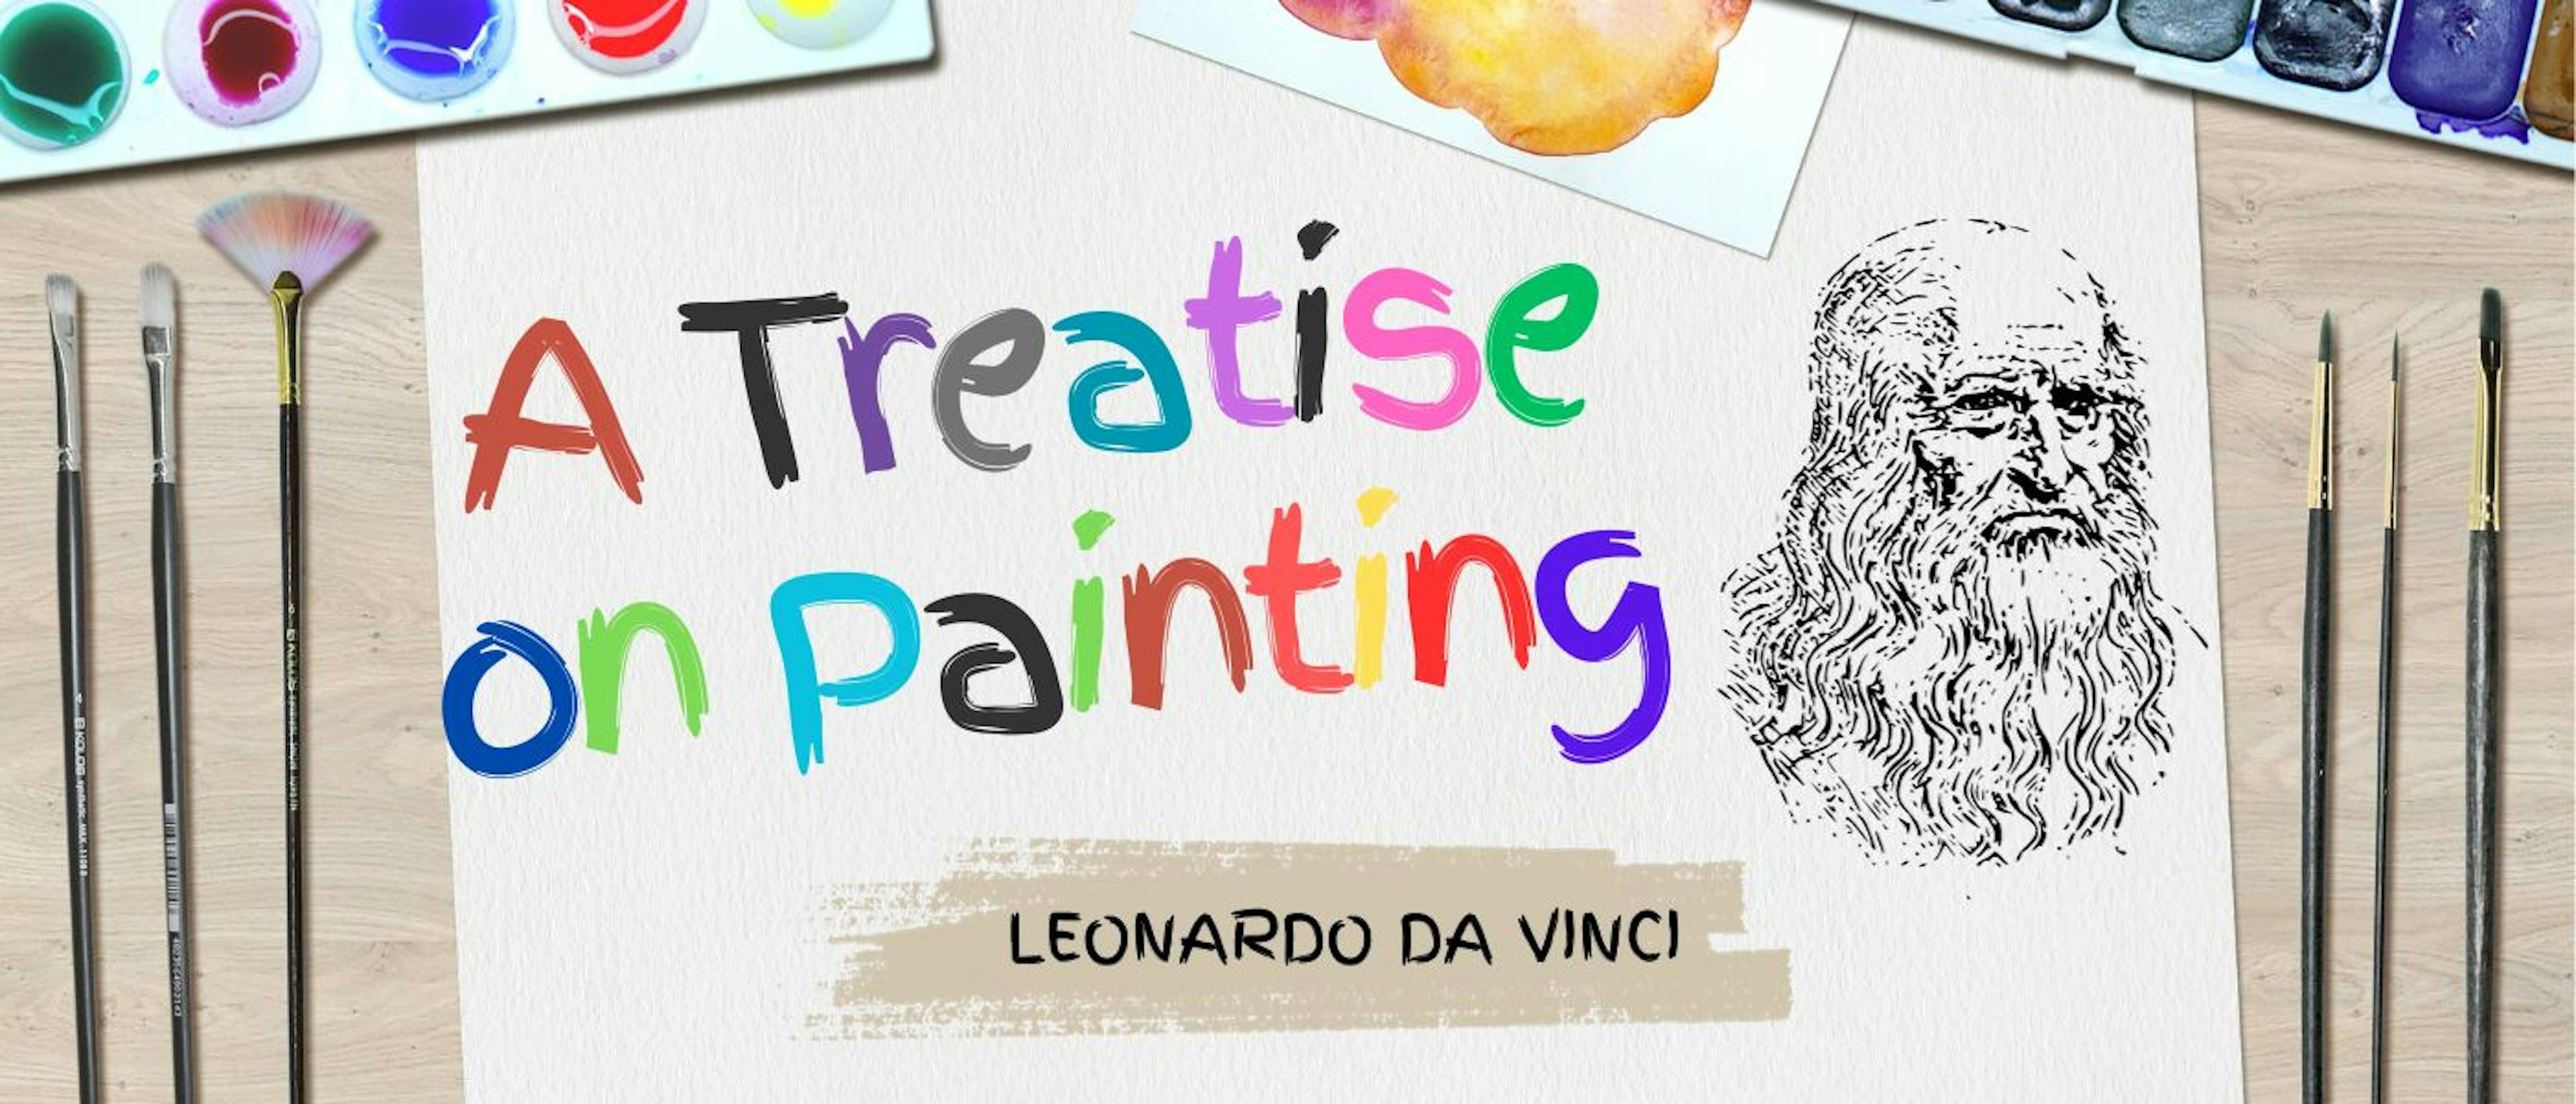 featured image - A Treatise on Painting by da Vinci Leonardo - Table of Links